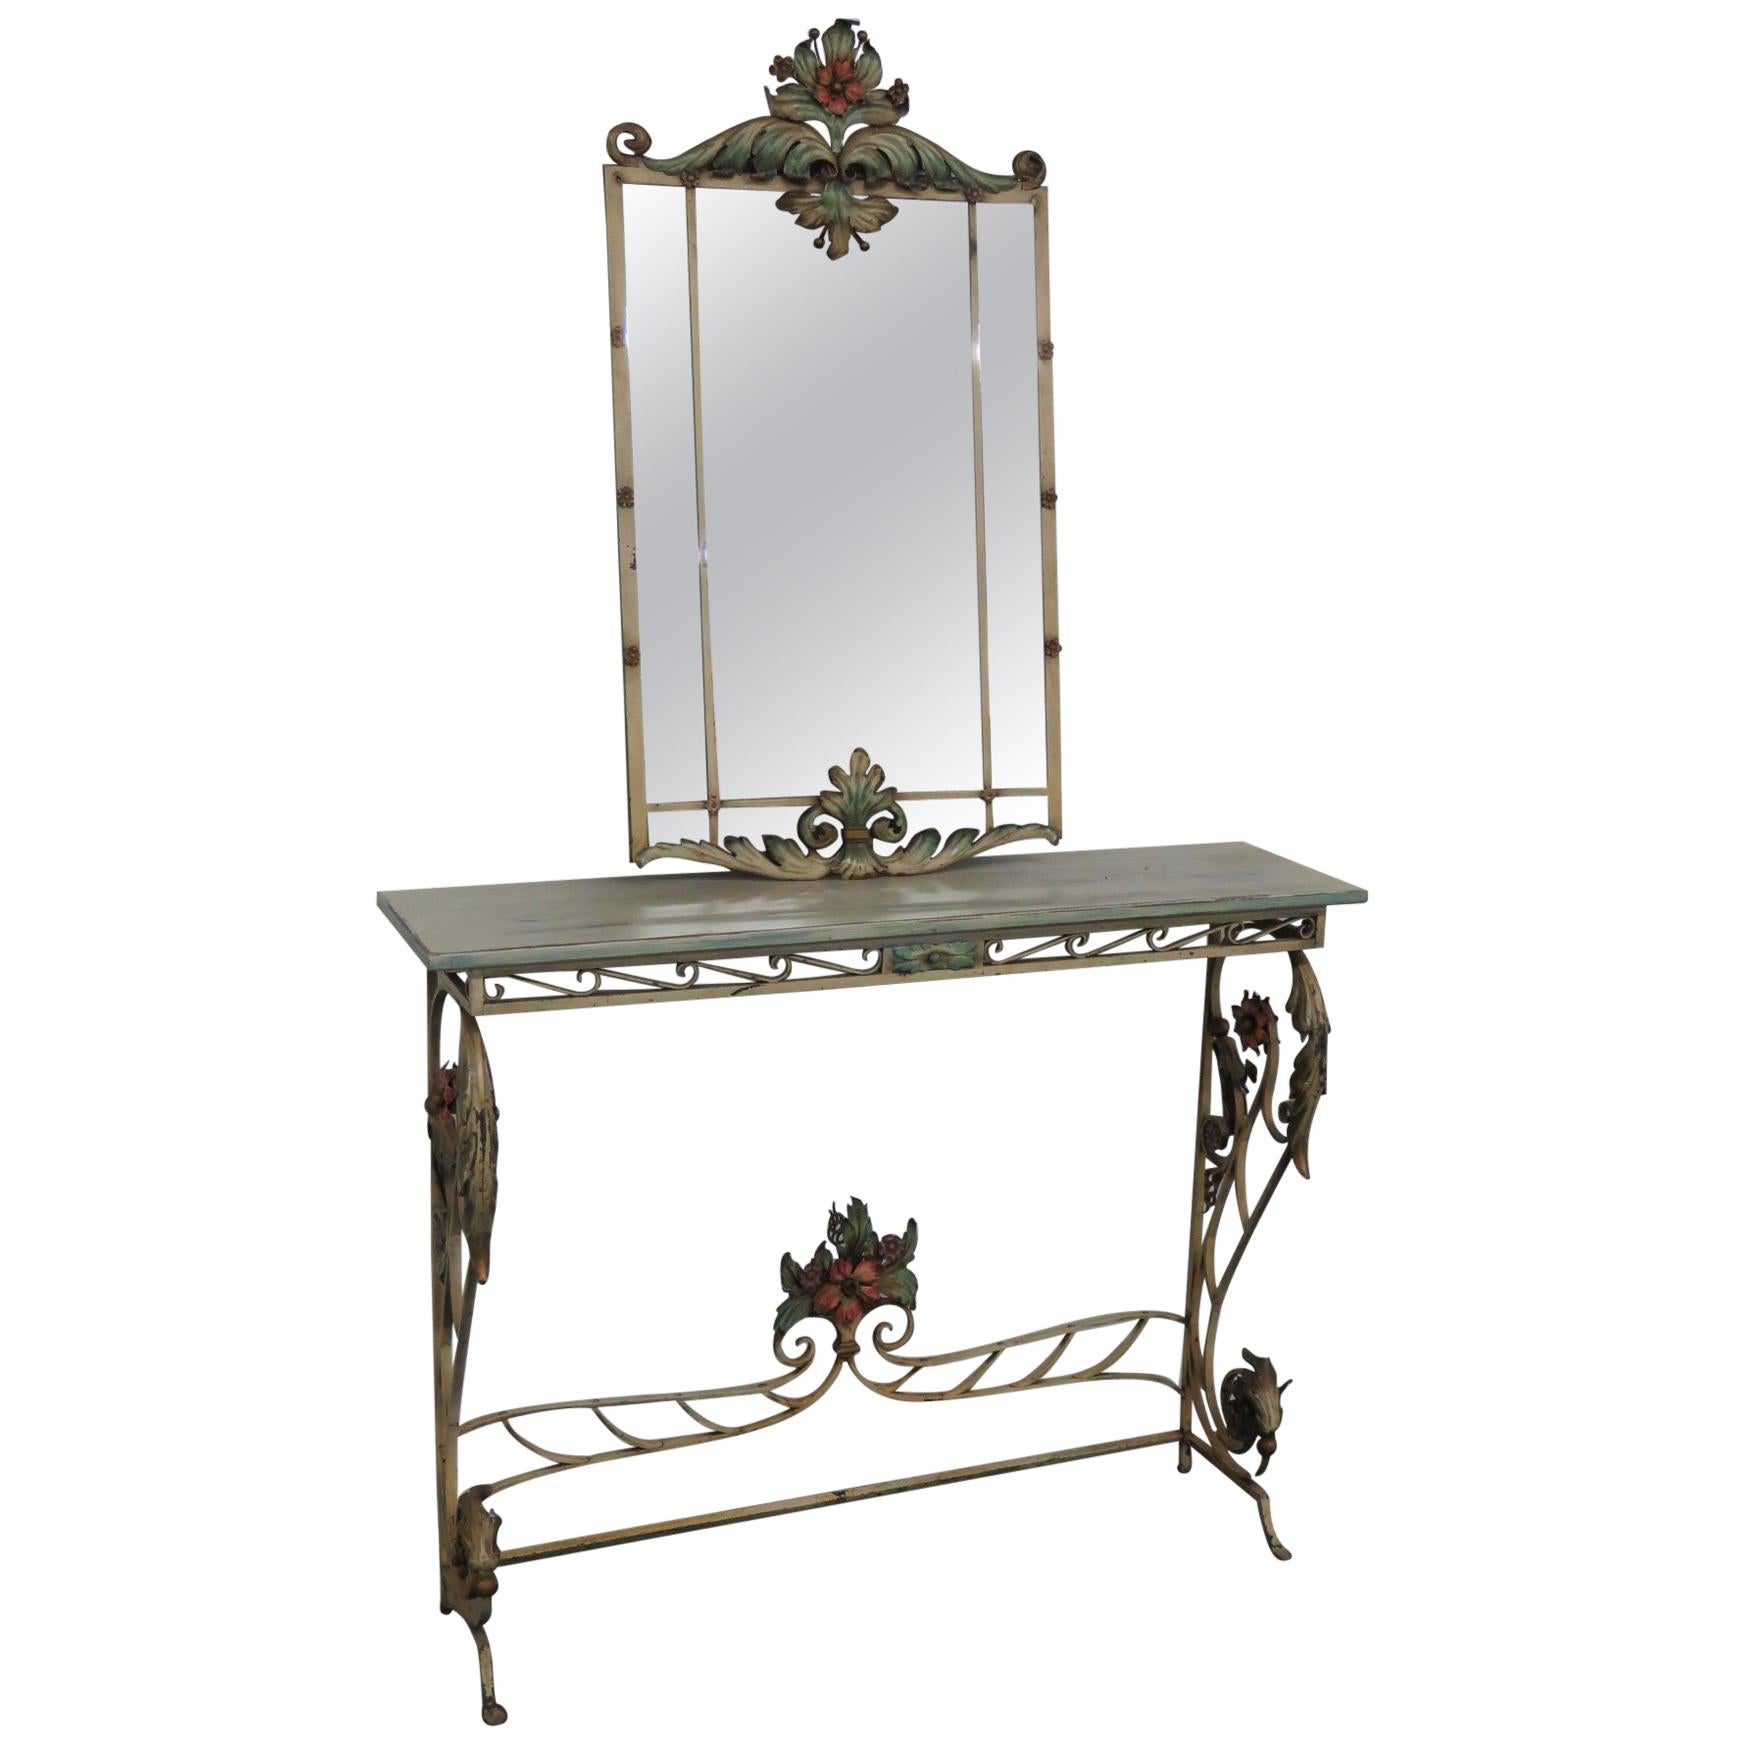 Paint Decorated Wrought Iron Italian Venetian Style Console and Mirror